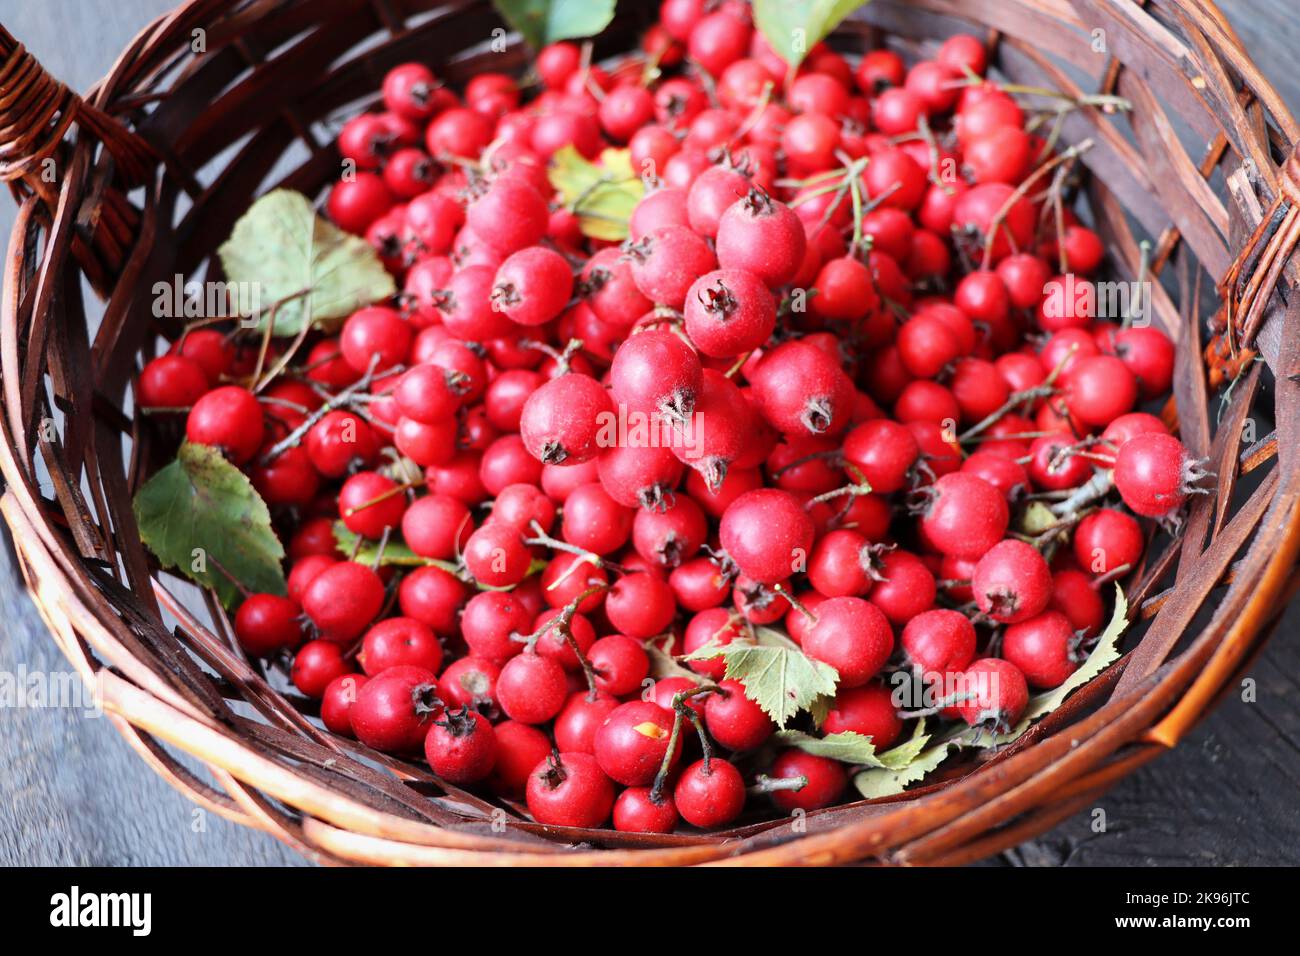 Ripe hawthorn berries, hawthorn branches in basket. Useful medicinal plants Stock Photo